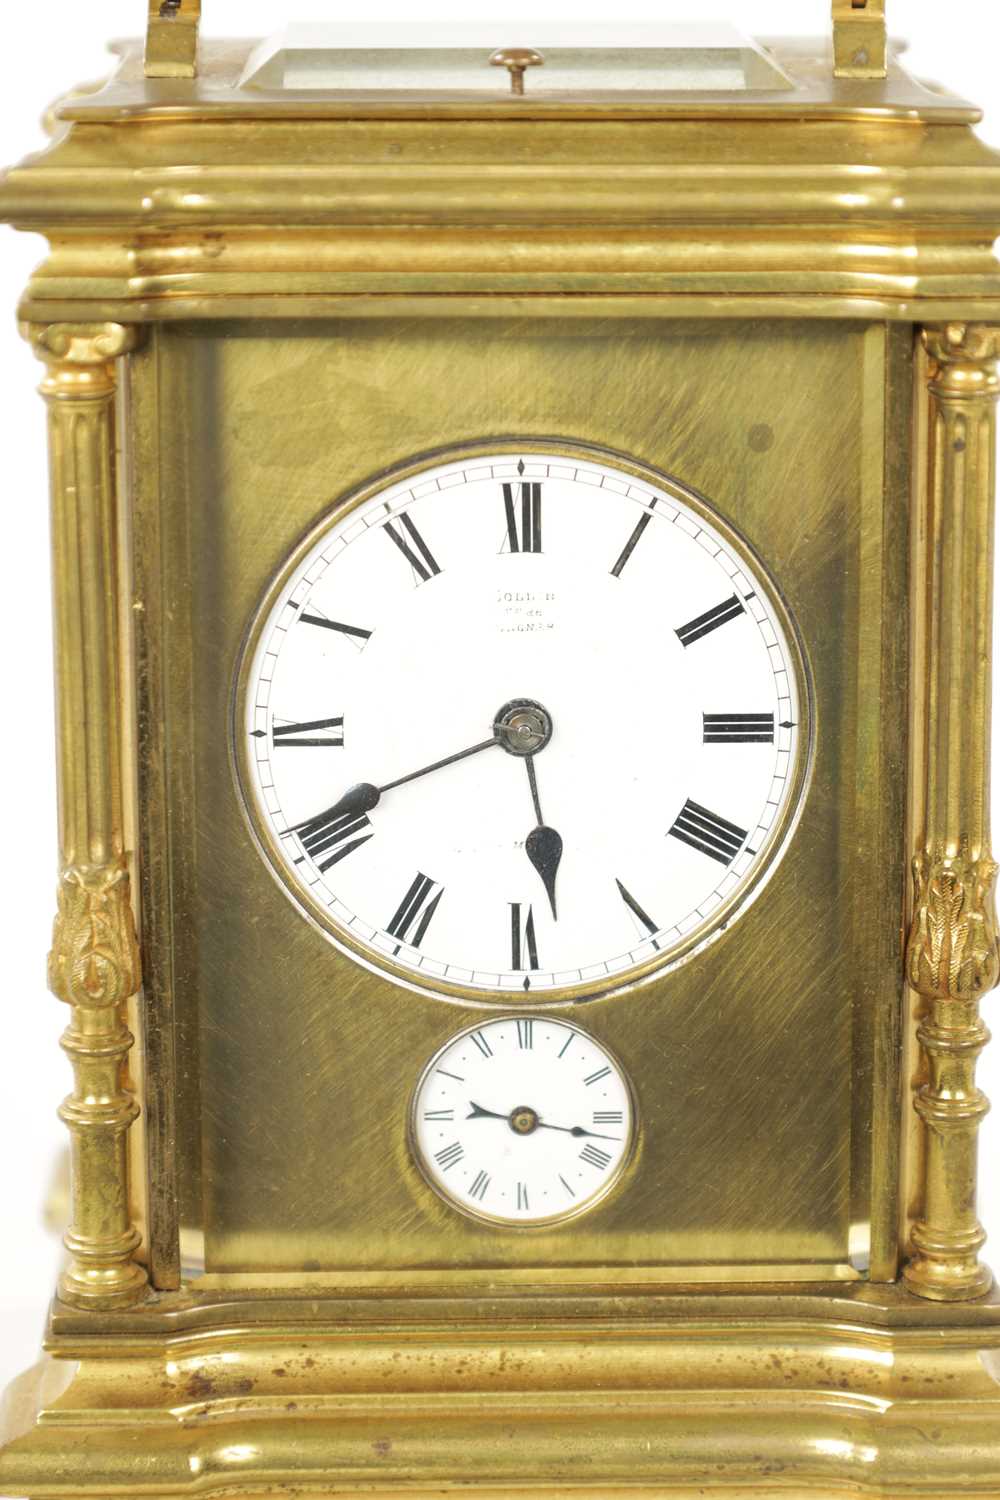 A LATE 19TH CENTURY GRAND SONNERIE REPEATING CARRIAGE CLOCK WITH ALAR - Image 3 of 8